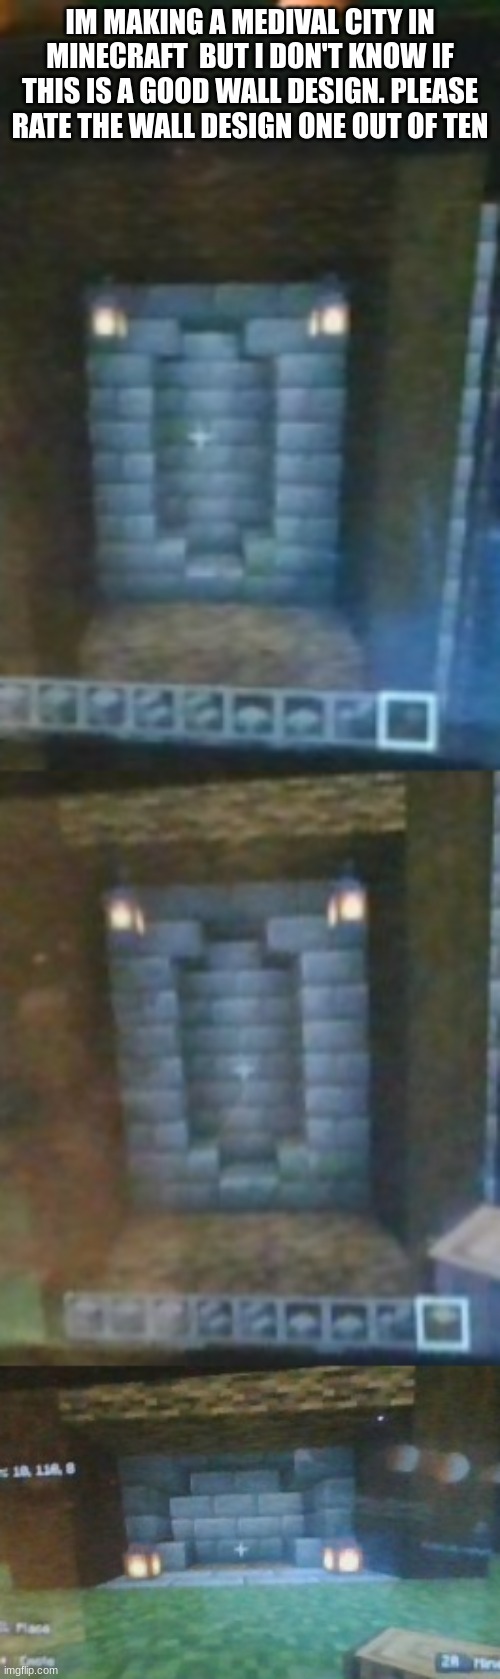 yufxn ubvkhugggggch.,fjghcbvkmns thfvbmn | IM MAKING A MEDIVAL CITY IN MINECRAFT  BUT I DON'T KNOW IF THIS IS A GOOD WALL DESIGN. PLEASE RATE THE WALL DESIGN ONE OUT OF TEN | image tagged in hjf,bk,j,yu,ghv,bj | made w/ Imgflip meme maker